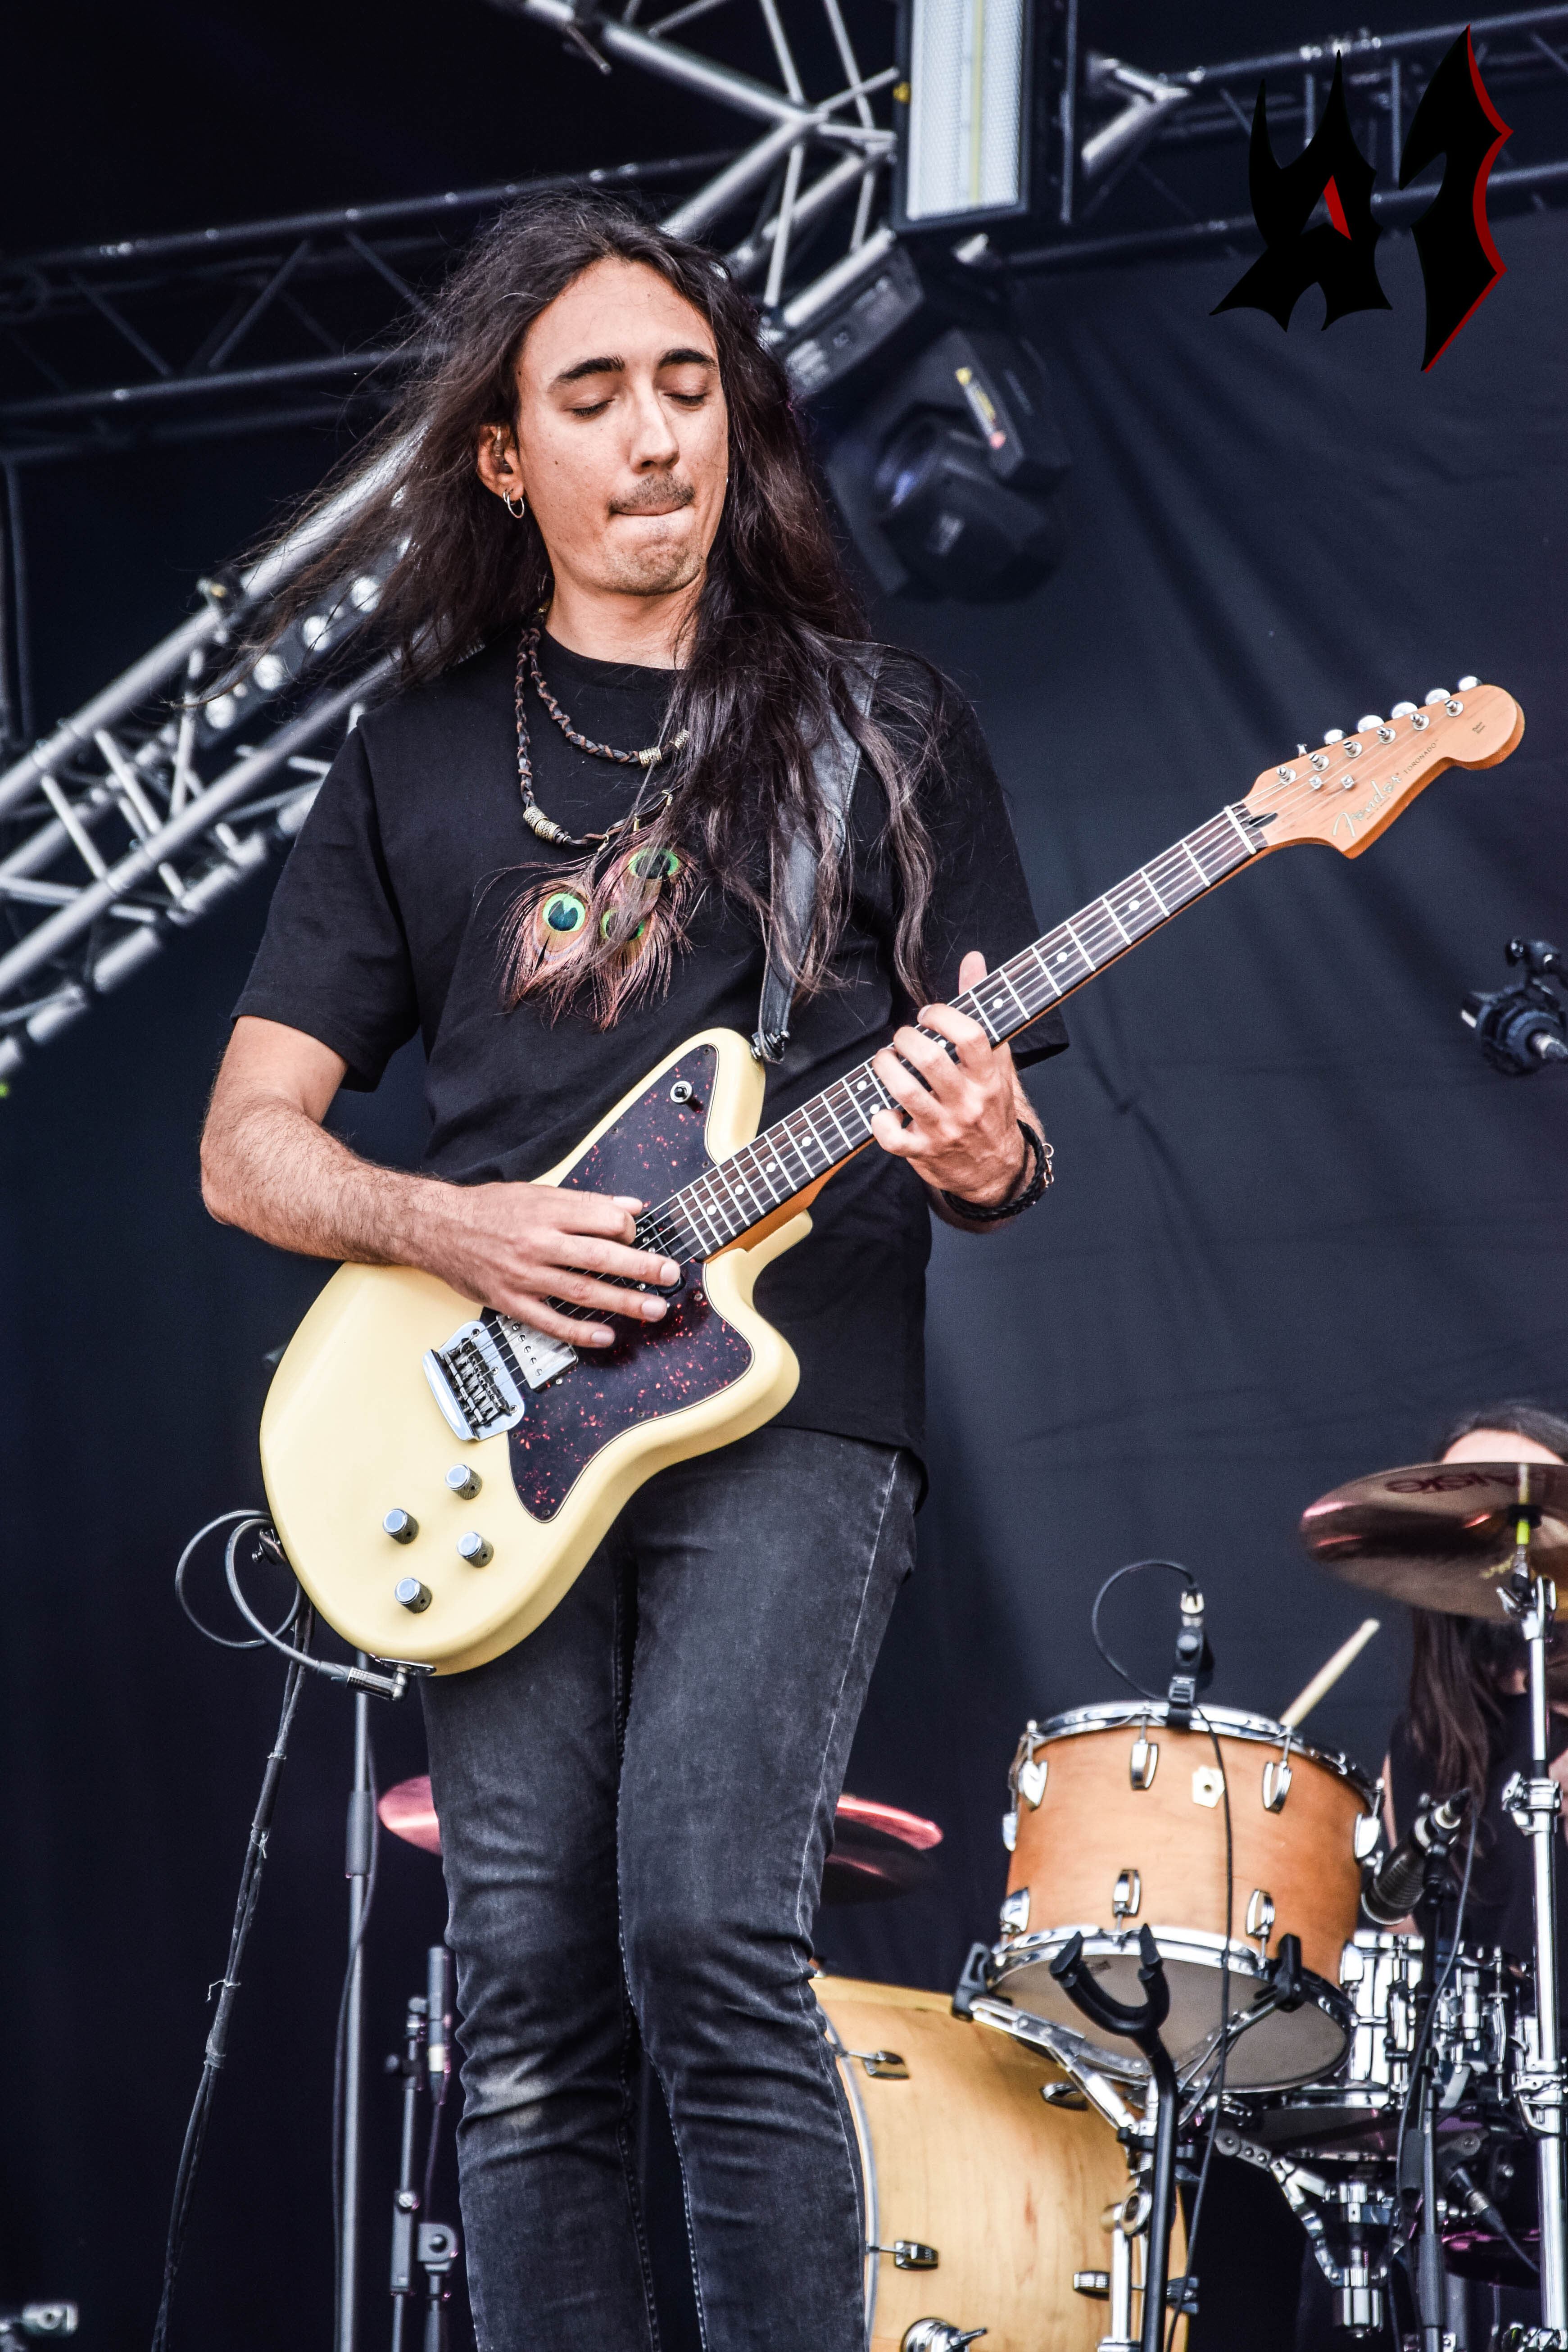 Donwload 2018 – Day 2 - Alcest 9